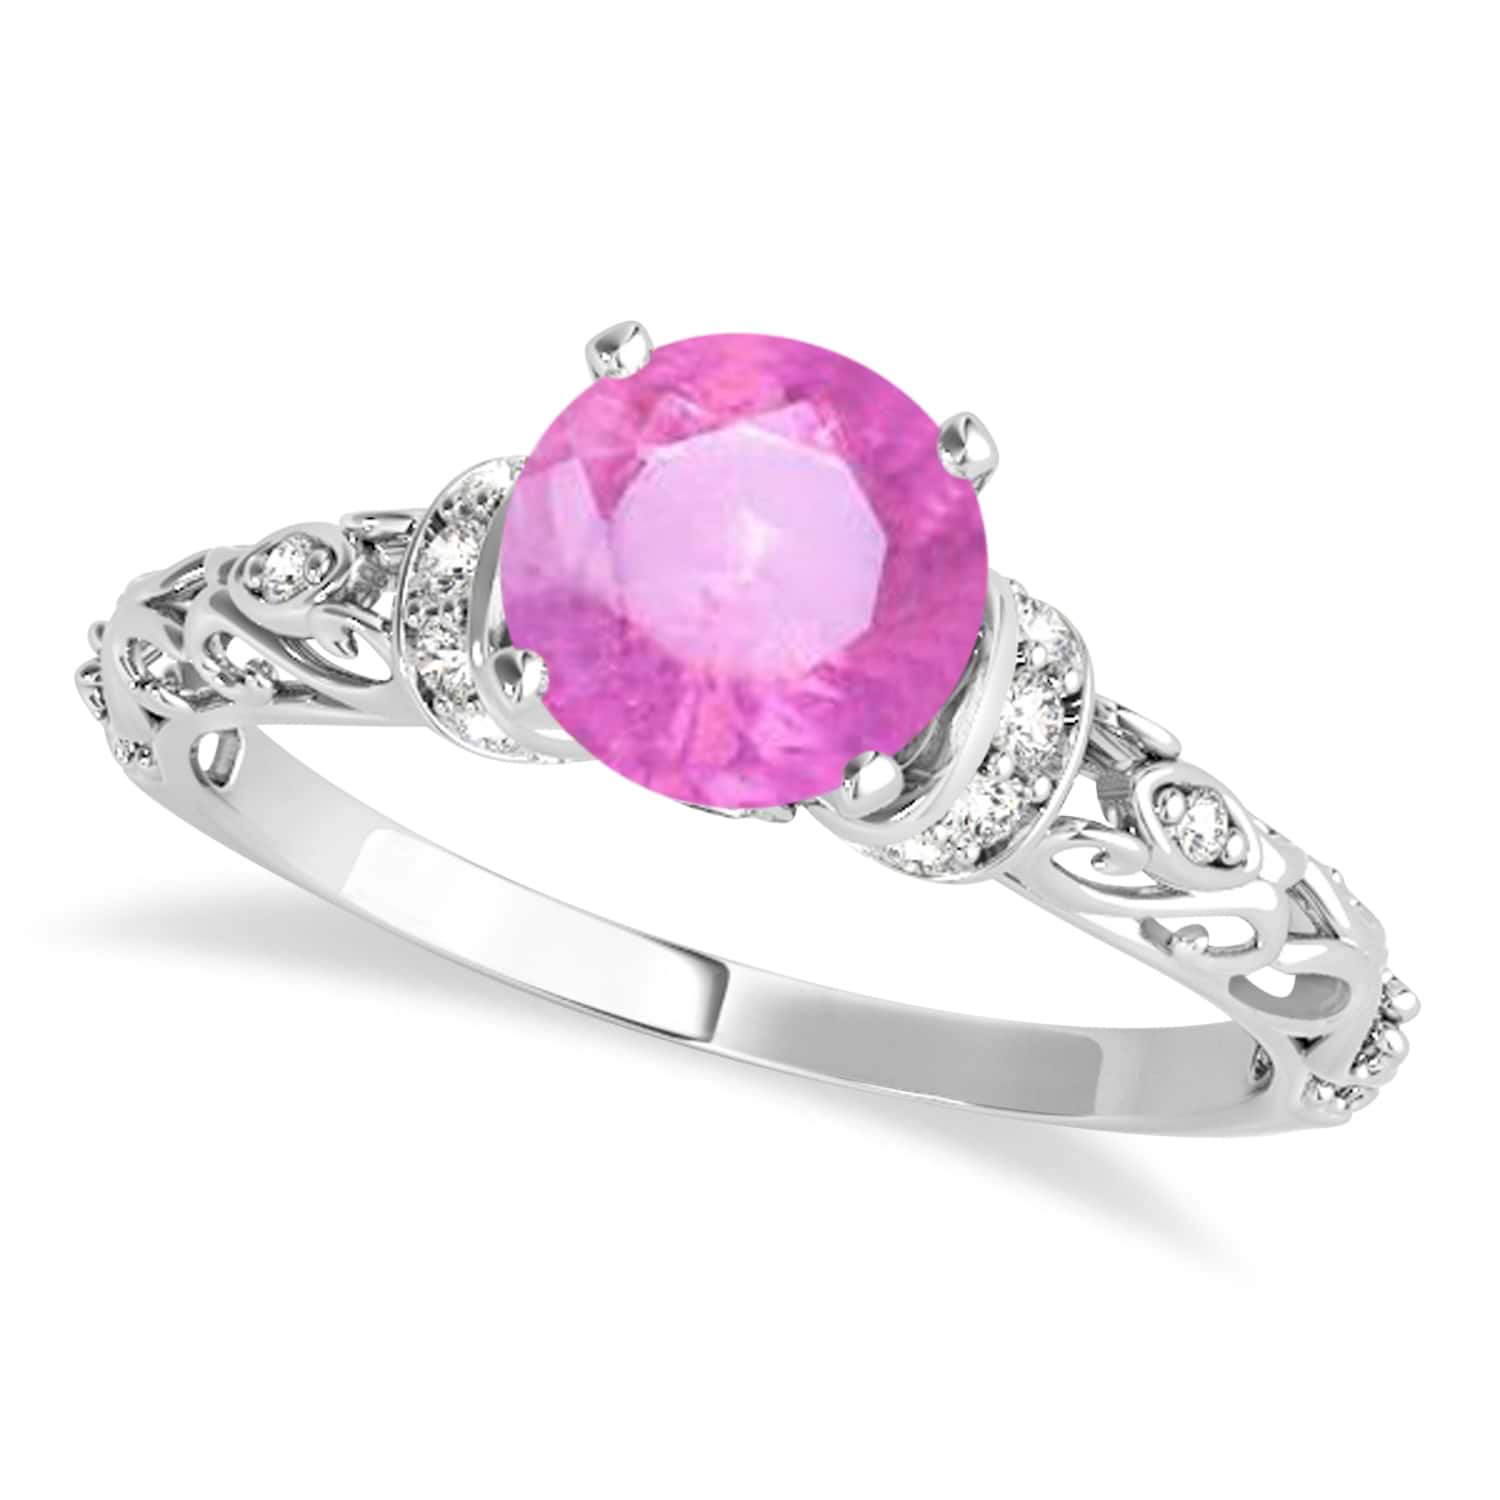 Pink Sapphire & Diamond Antique Style Engagement Ring 14k White Gold (1.12ct)